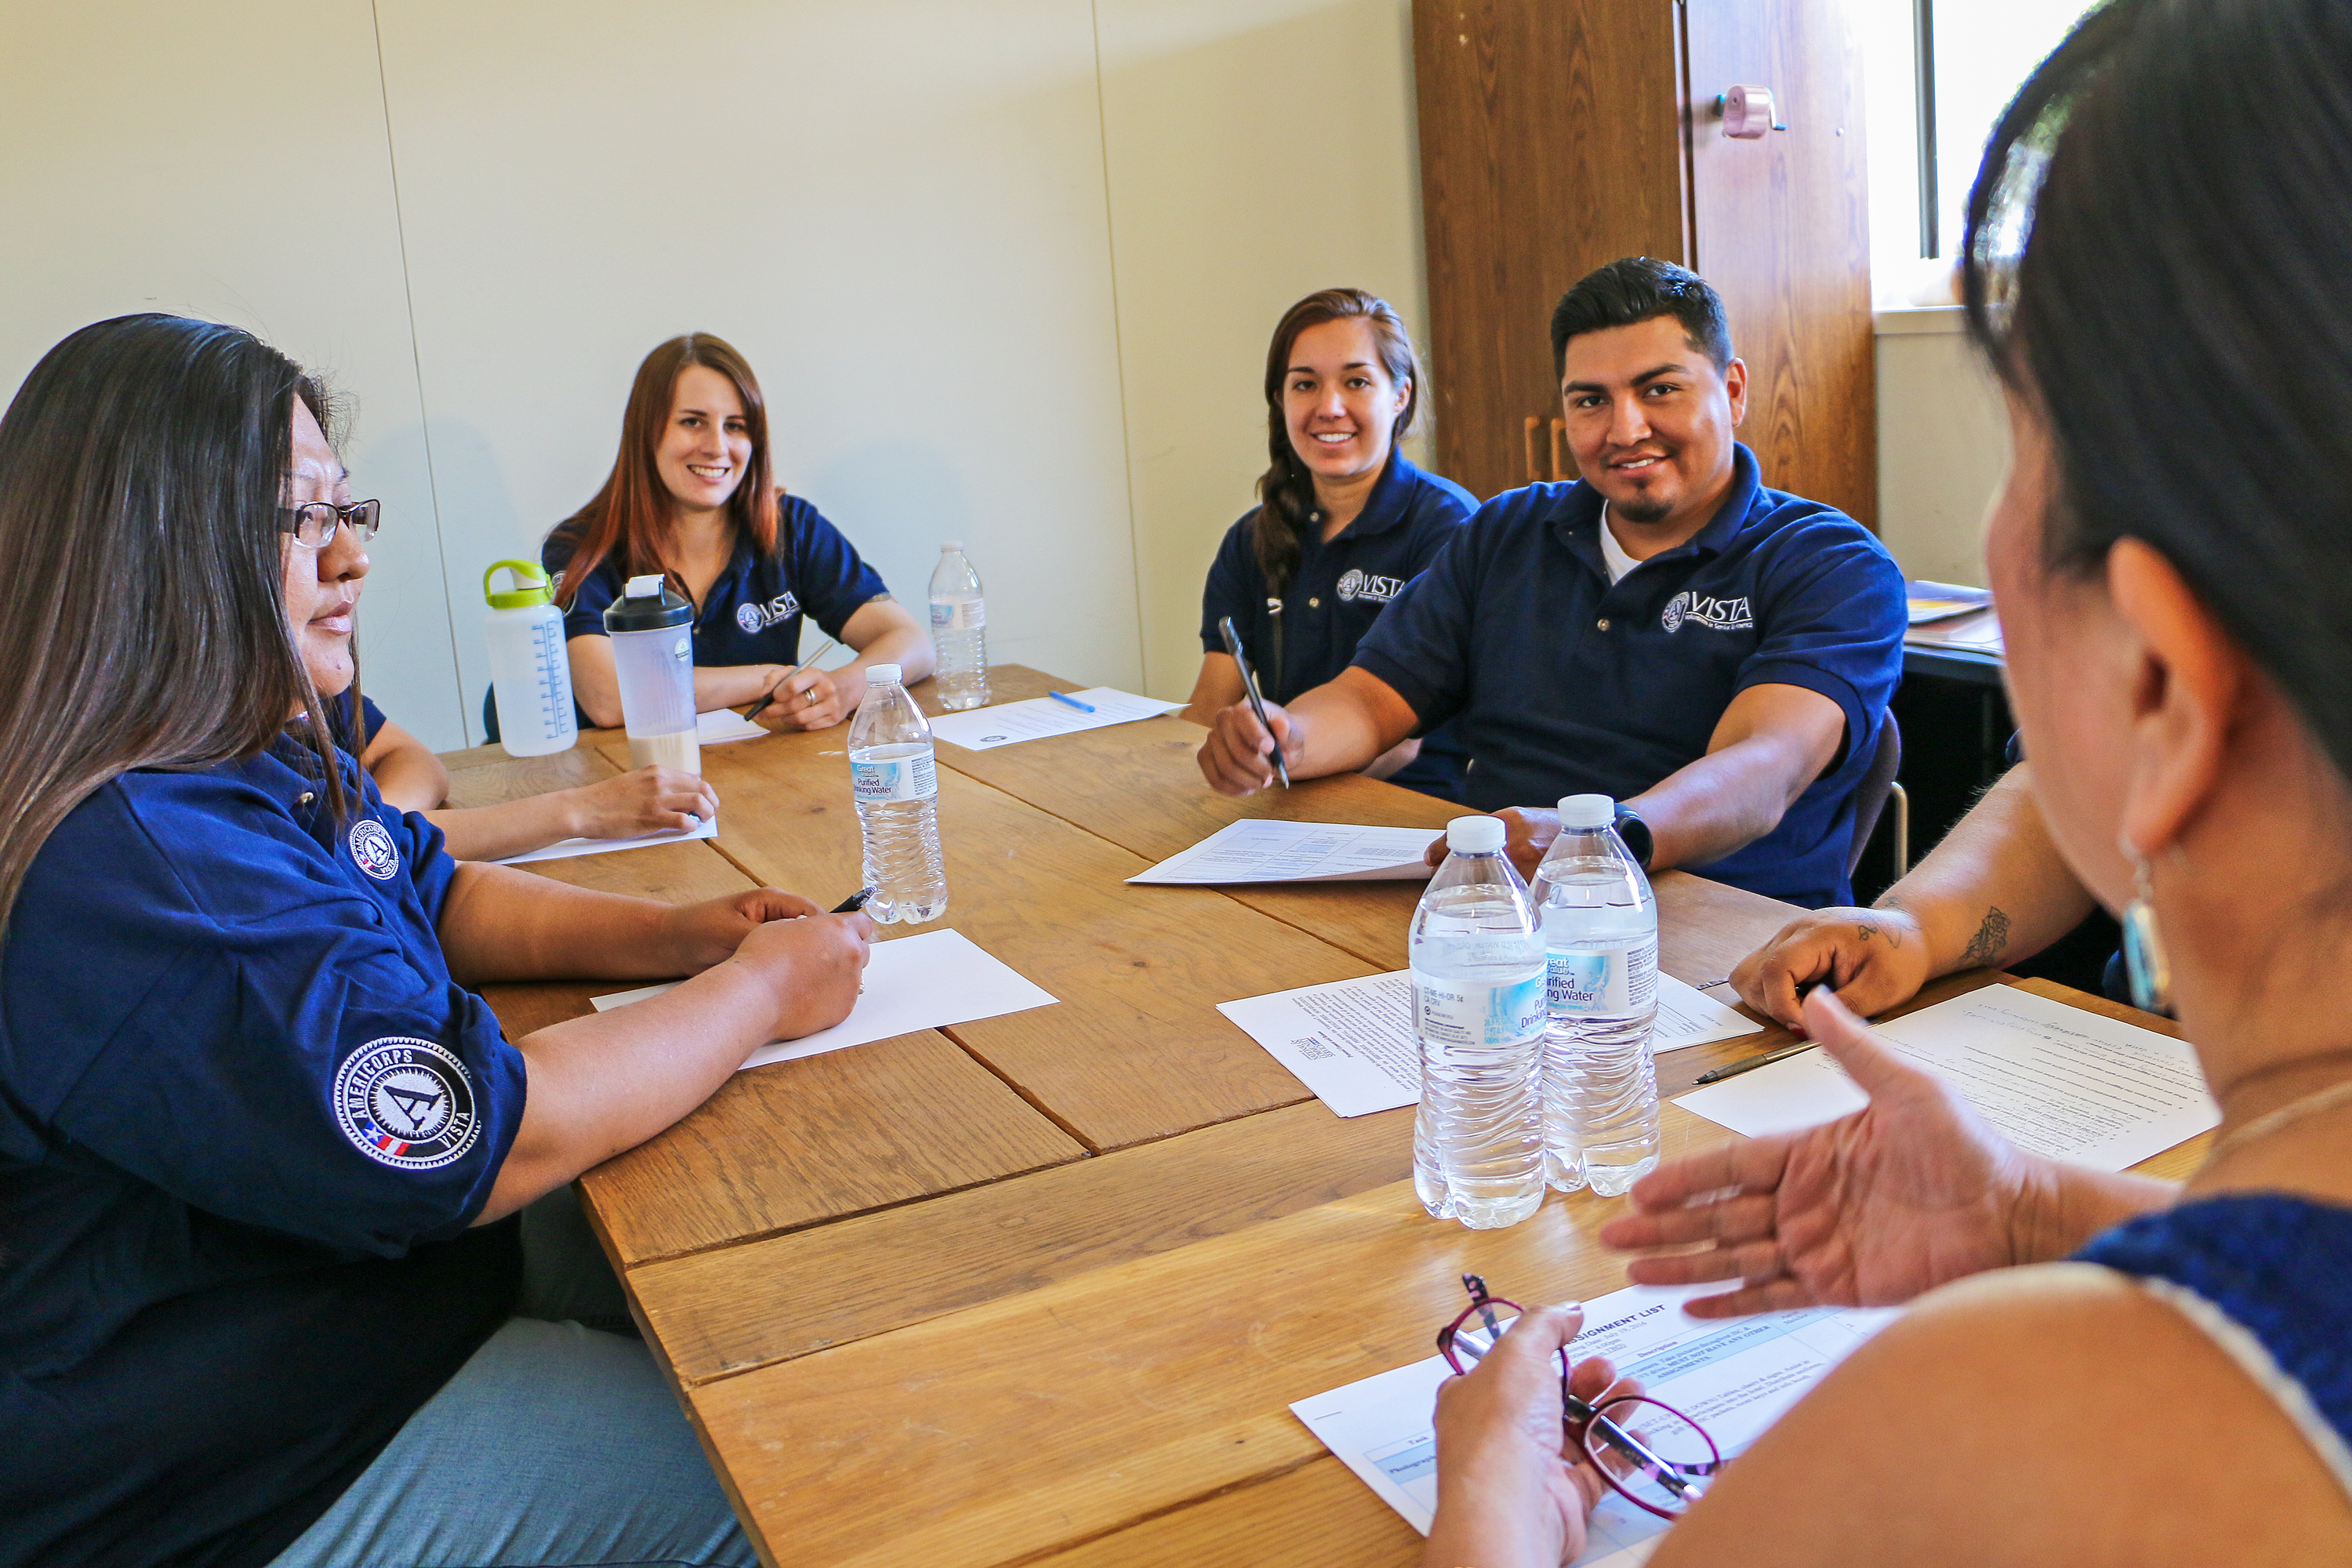 AmeriCorps VISTA members discuss their project